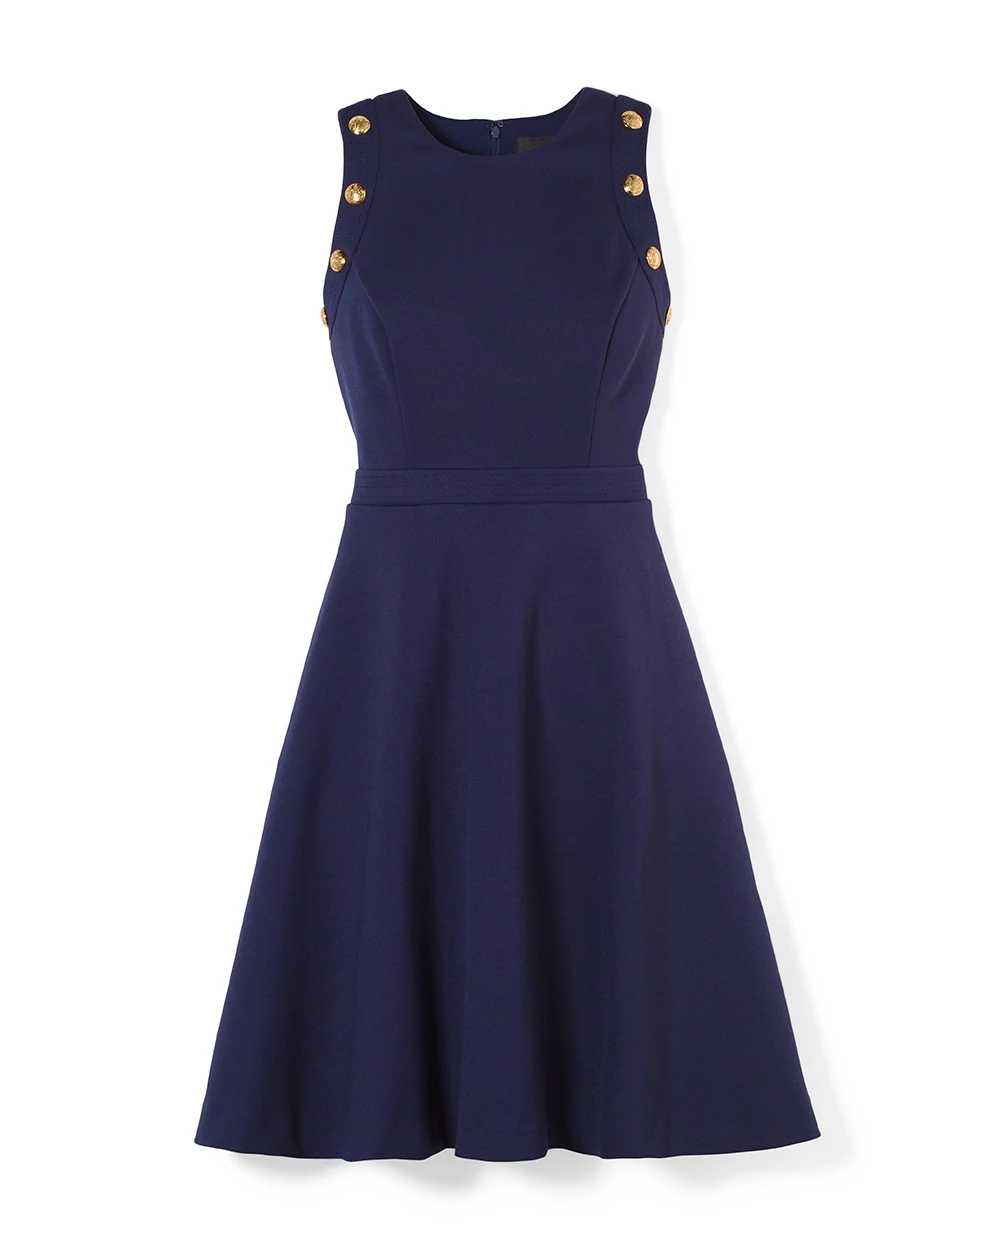 Petite Sleeveless Ponte Fit & Flare Dress With Crest Button Detail click to view larger image.